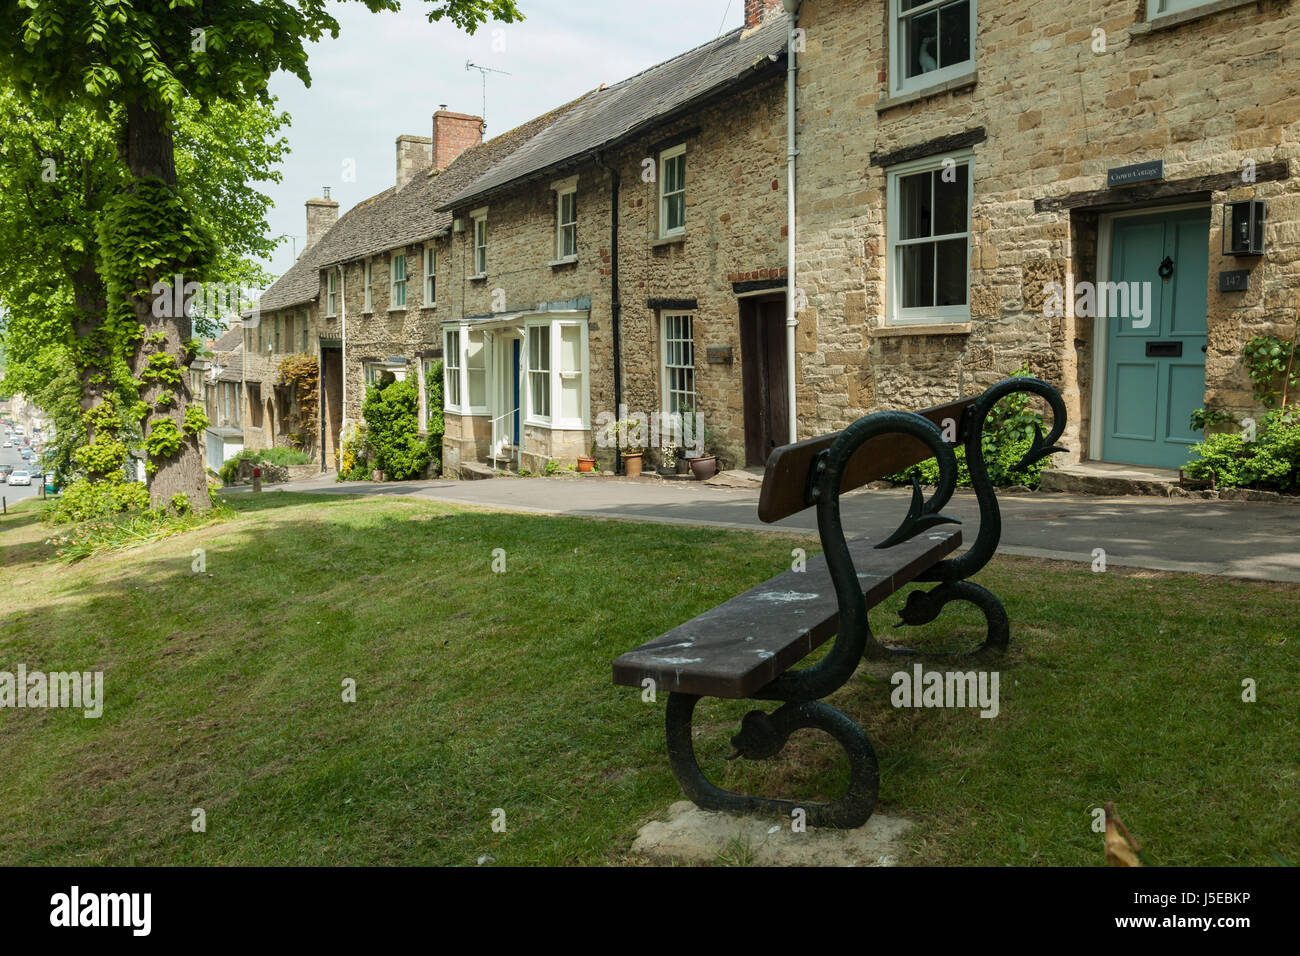 Spring afternoon in the Cotswold town of Burford, Oxfordshire, England. Stock Photo